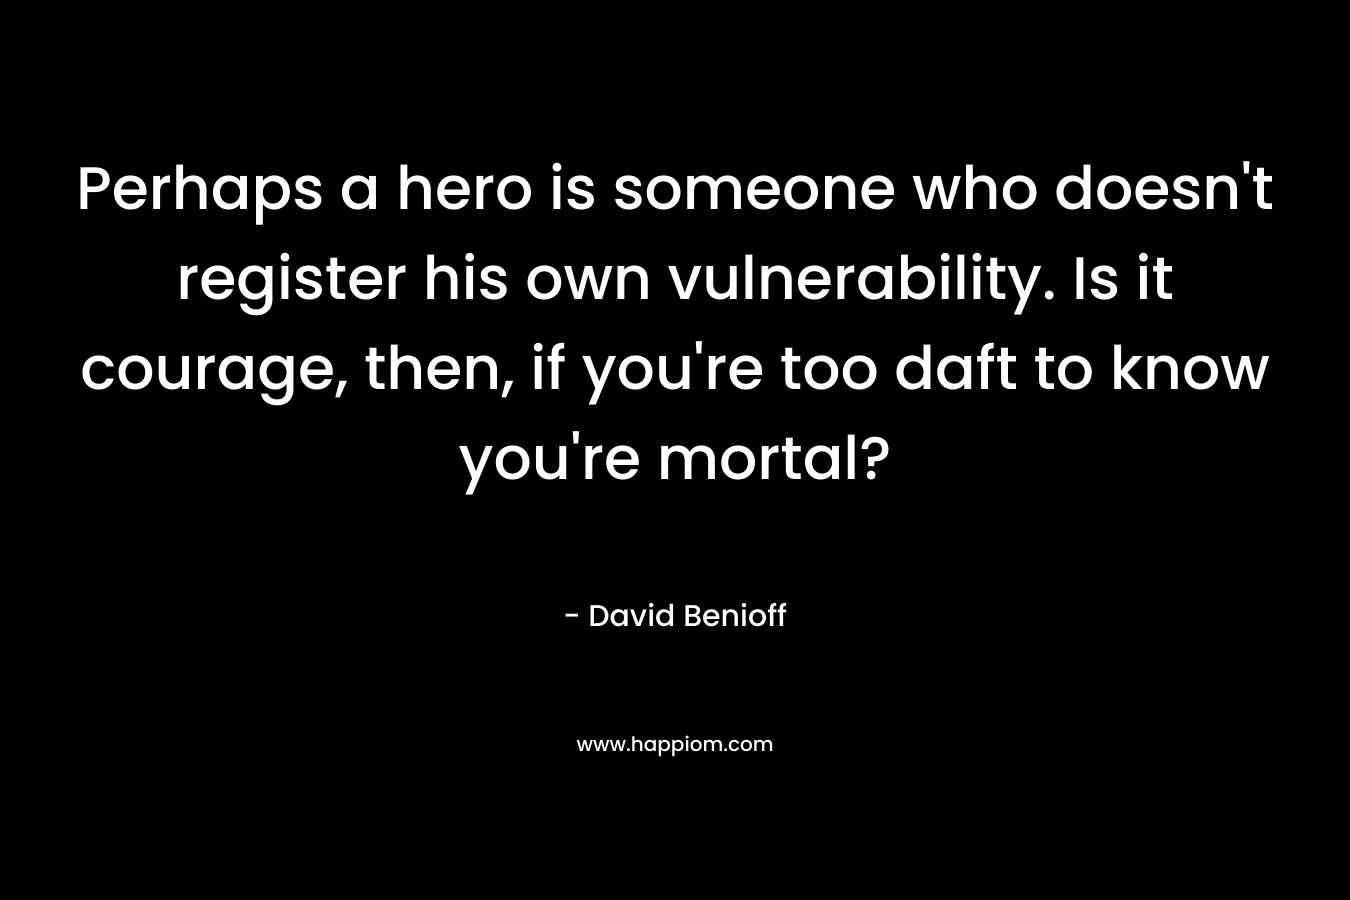 Perhaps a hero is someone who doesn’t register his own vulnerability. Is it courage, then, if you’re too daft to know you’re mortal? – David Benioff